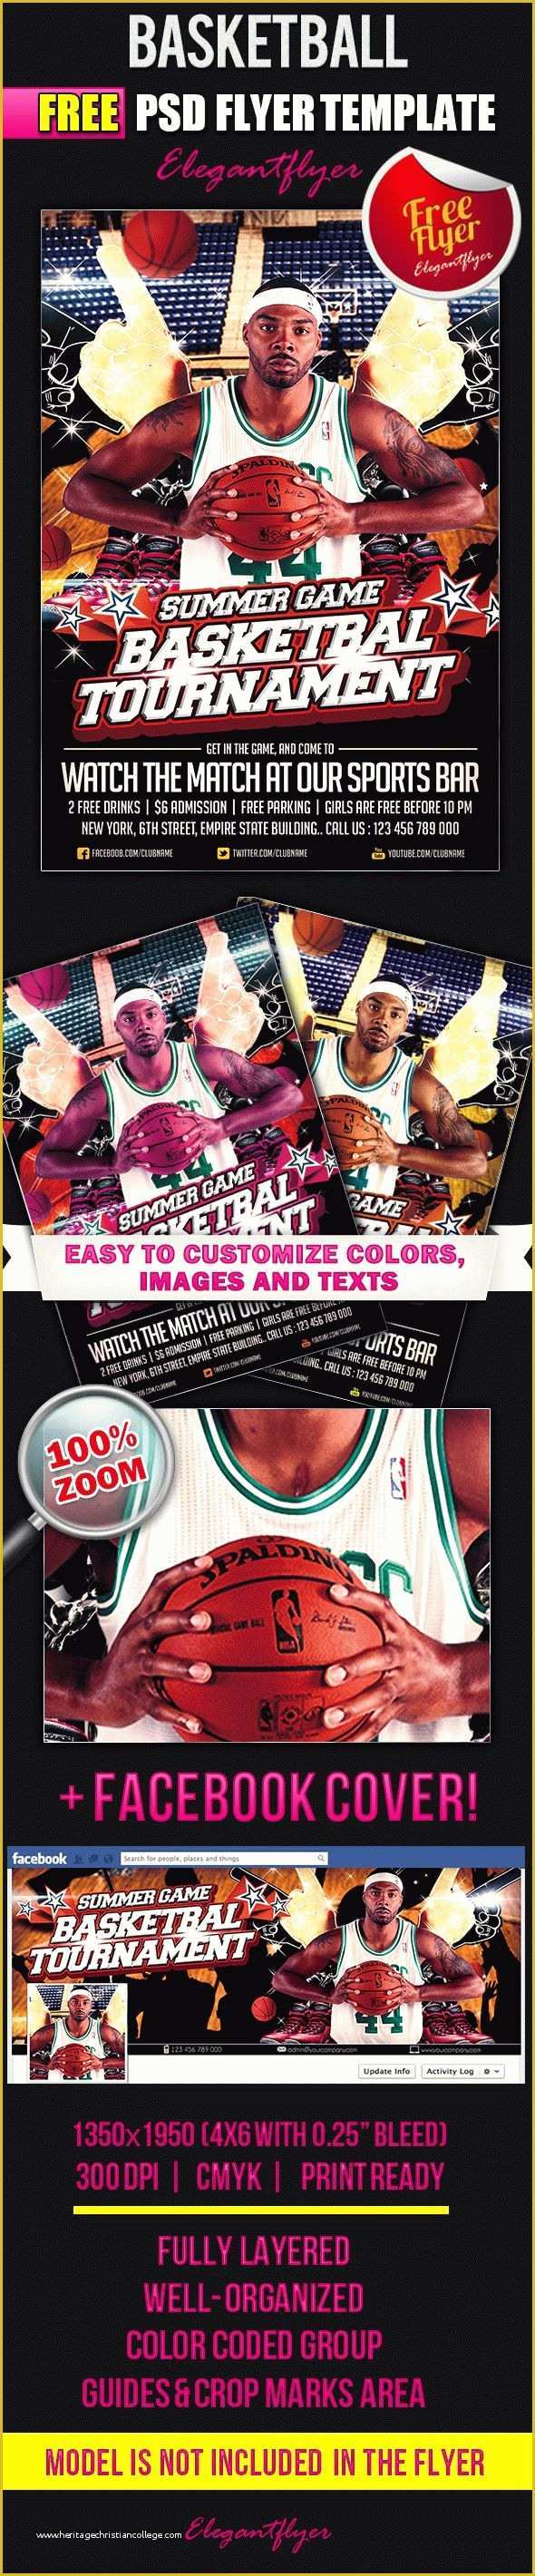 Free Basketball Photoshop Templates Of Basketball – Flyer Psd Template Cover – by